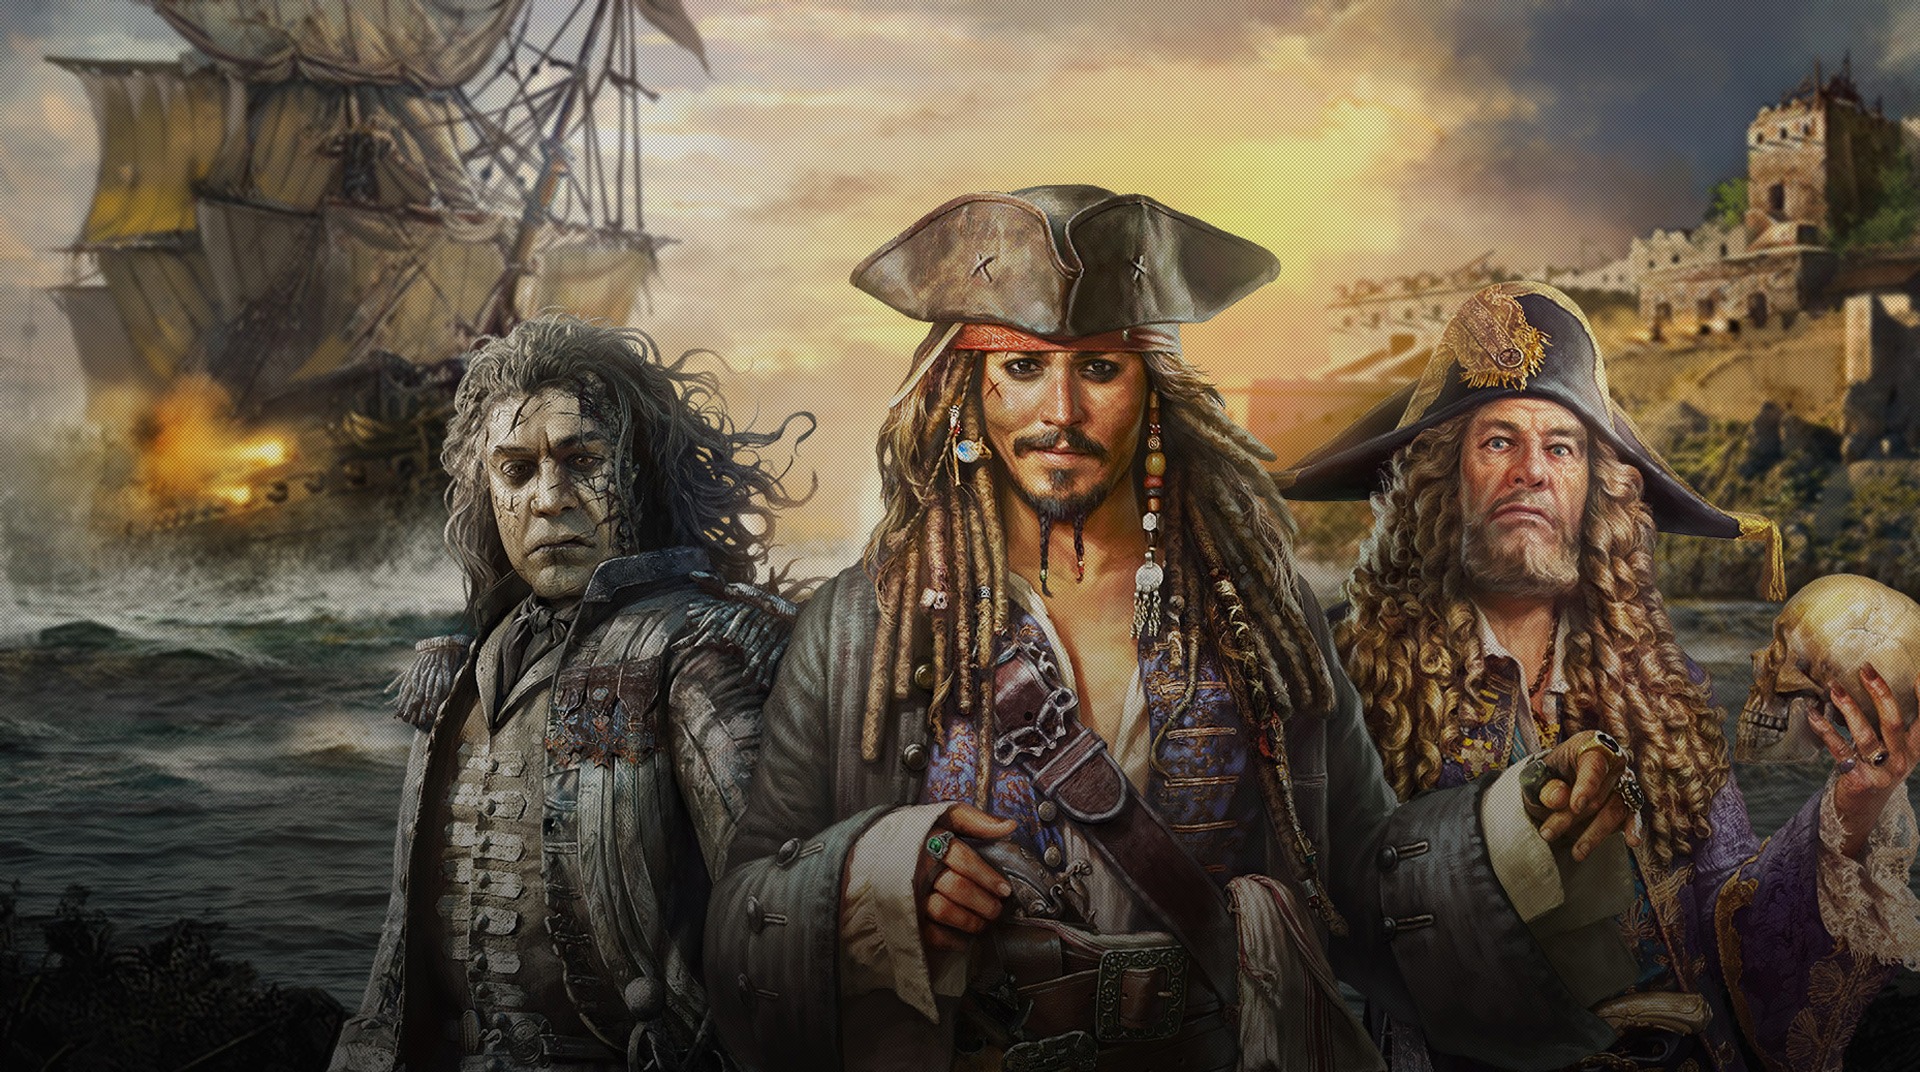 pirates of the caribbean tow resourses and gold mod apk download